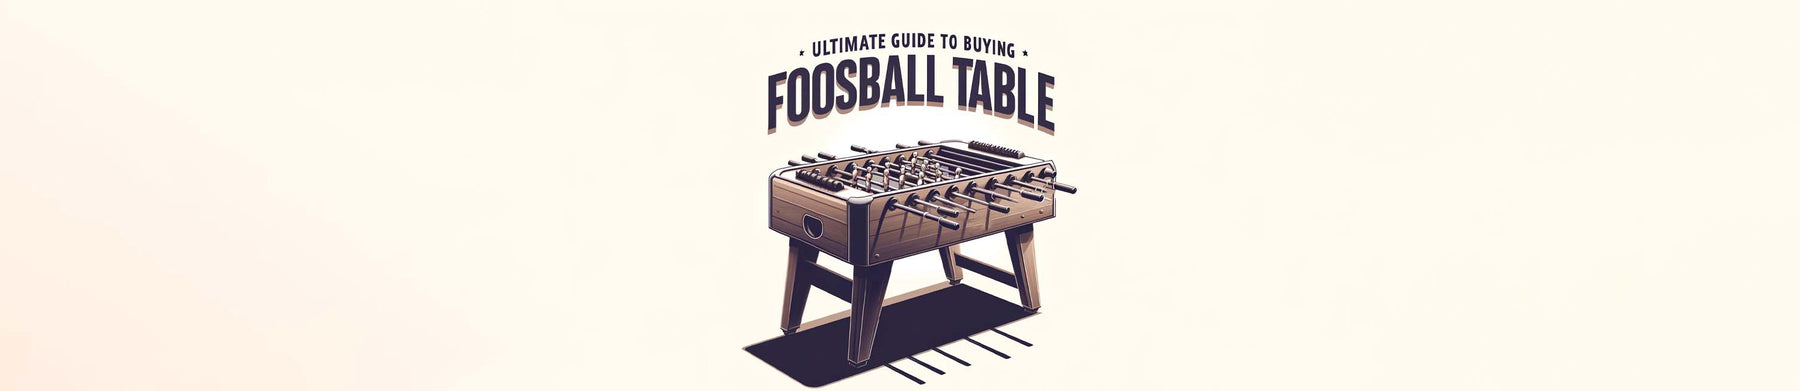 Ultimate Guide to Buying a Foosball Table